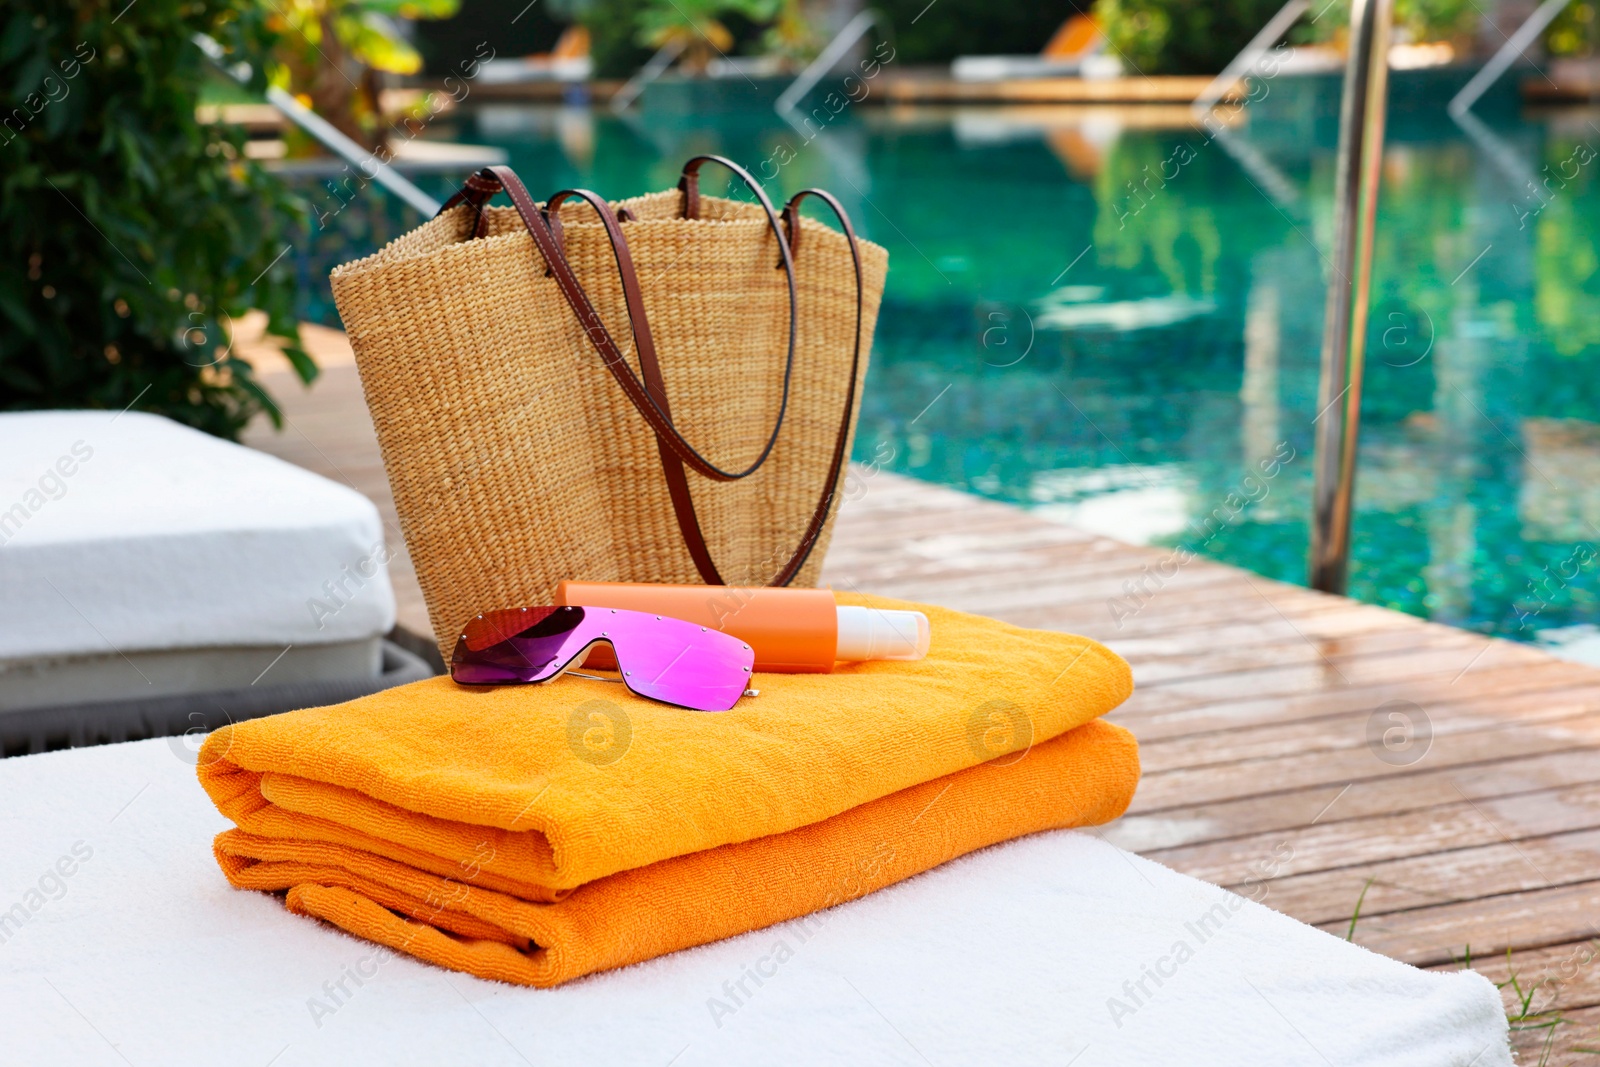 Photo of Wicker bag and beach accessories on sunbed near outdoor swimming pool. Luxury resort